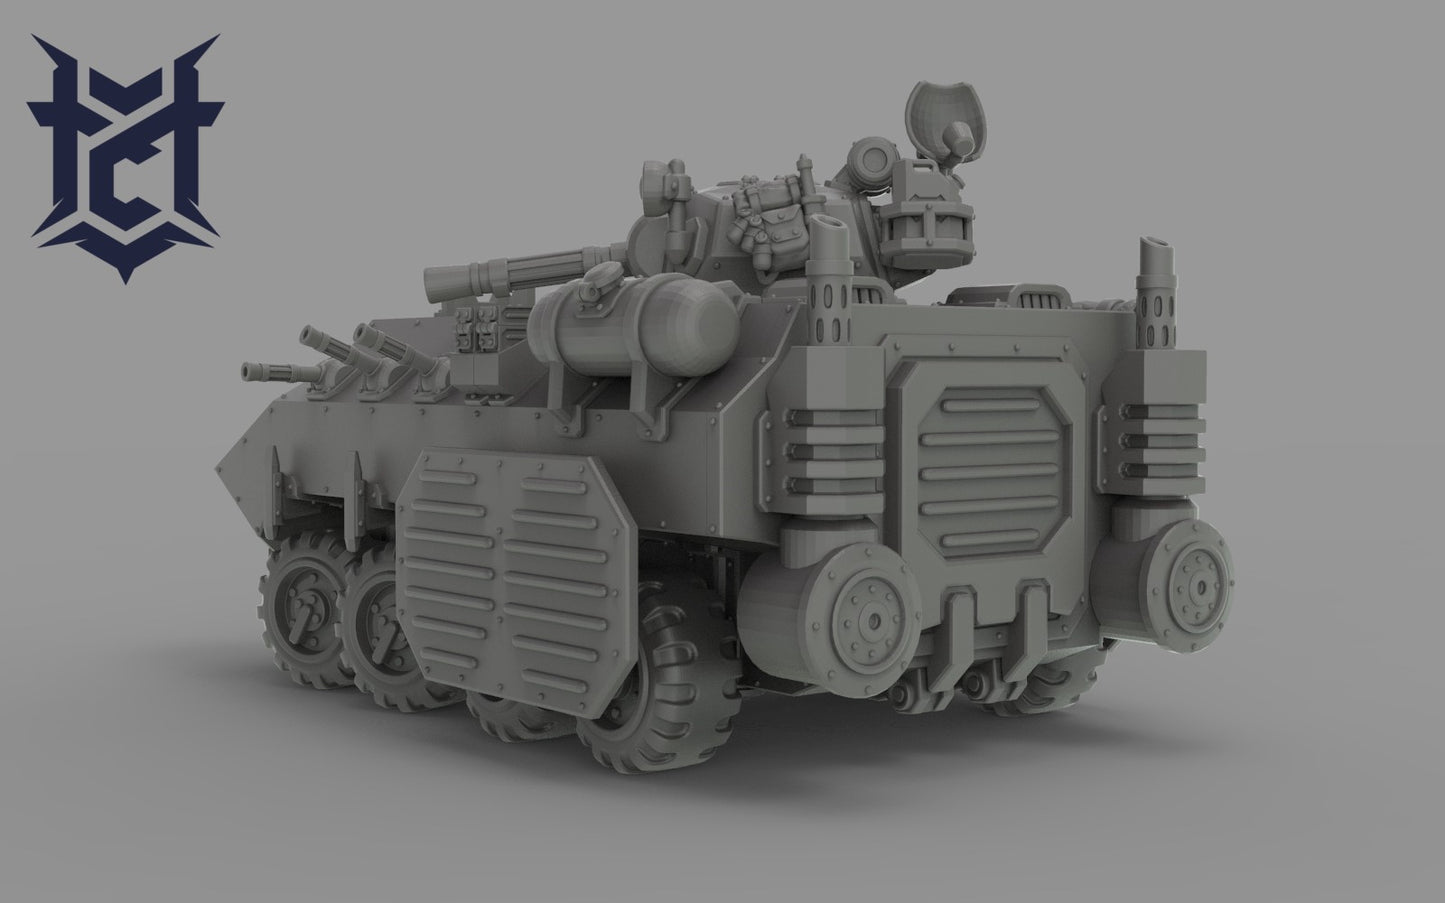 28mm Armoured Troop Carrier 'Pacer'